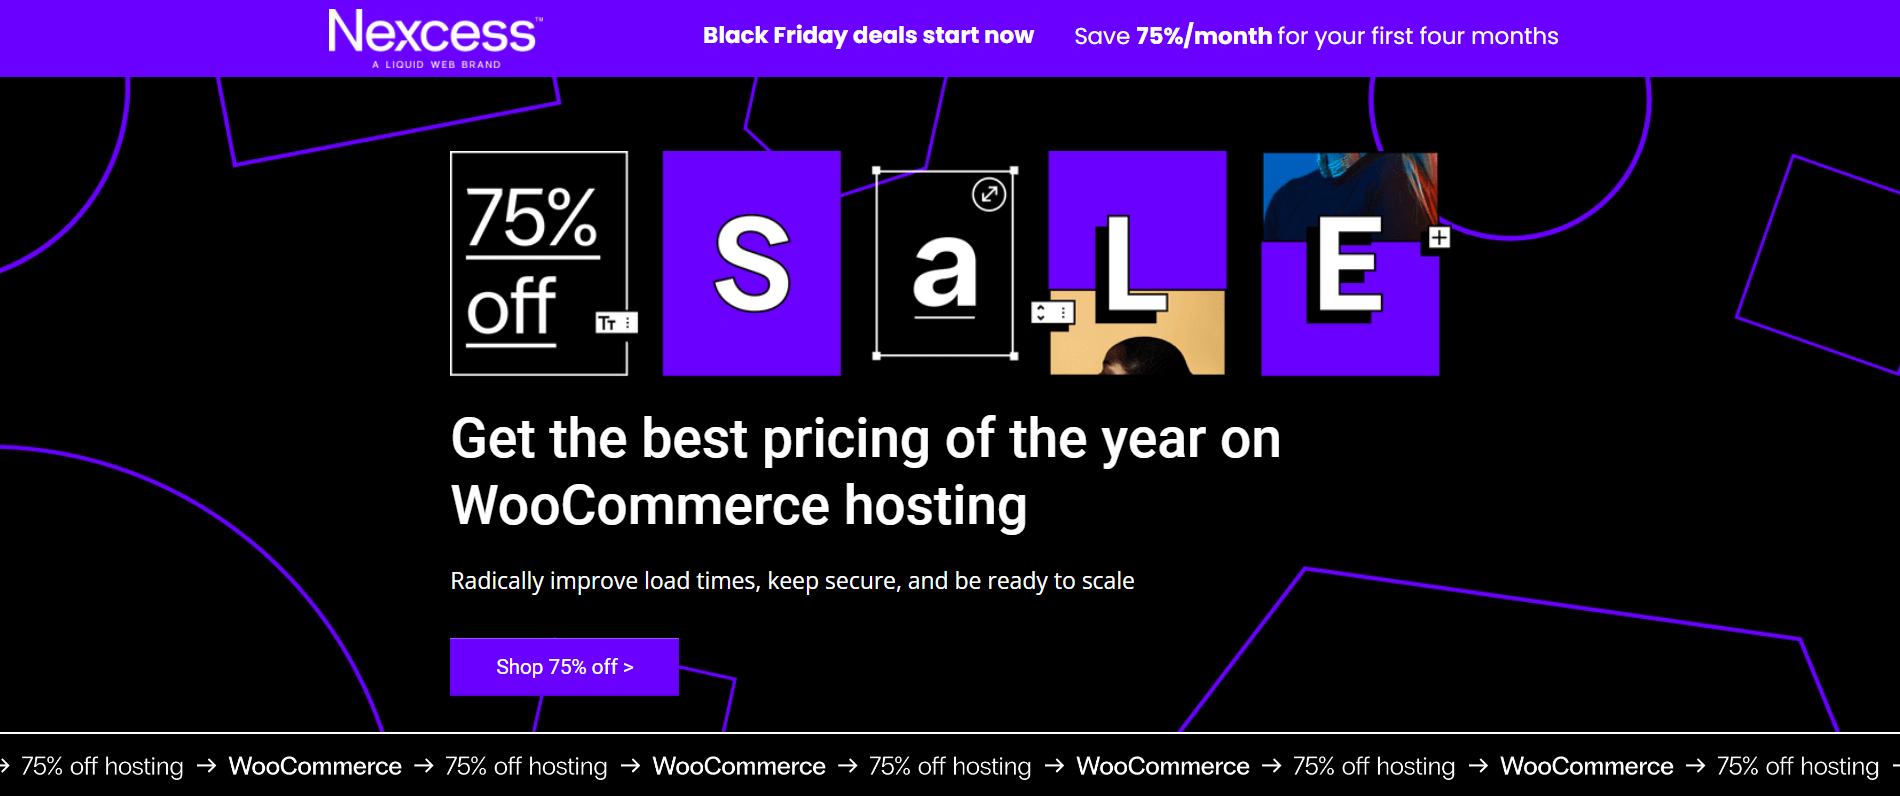 Nexcess Black Friday WooCommerce Deals Page